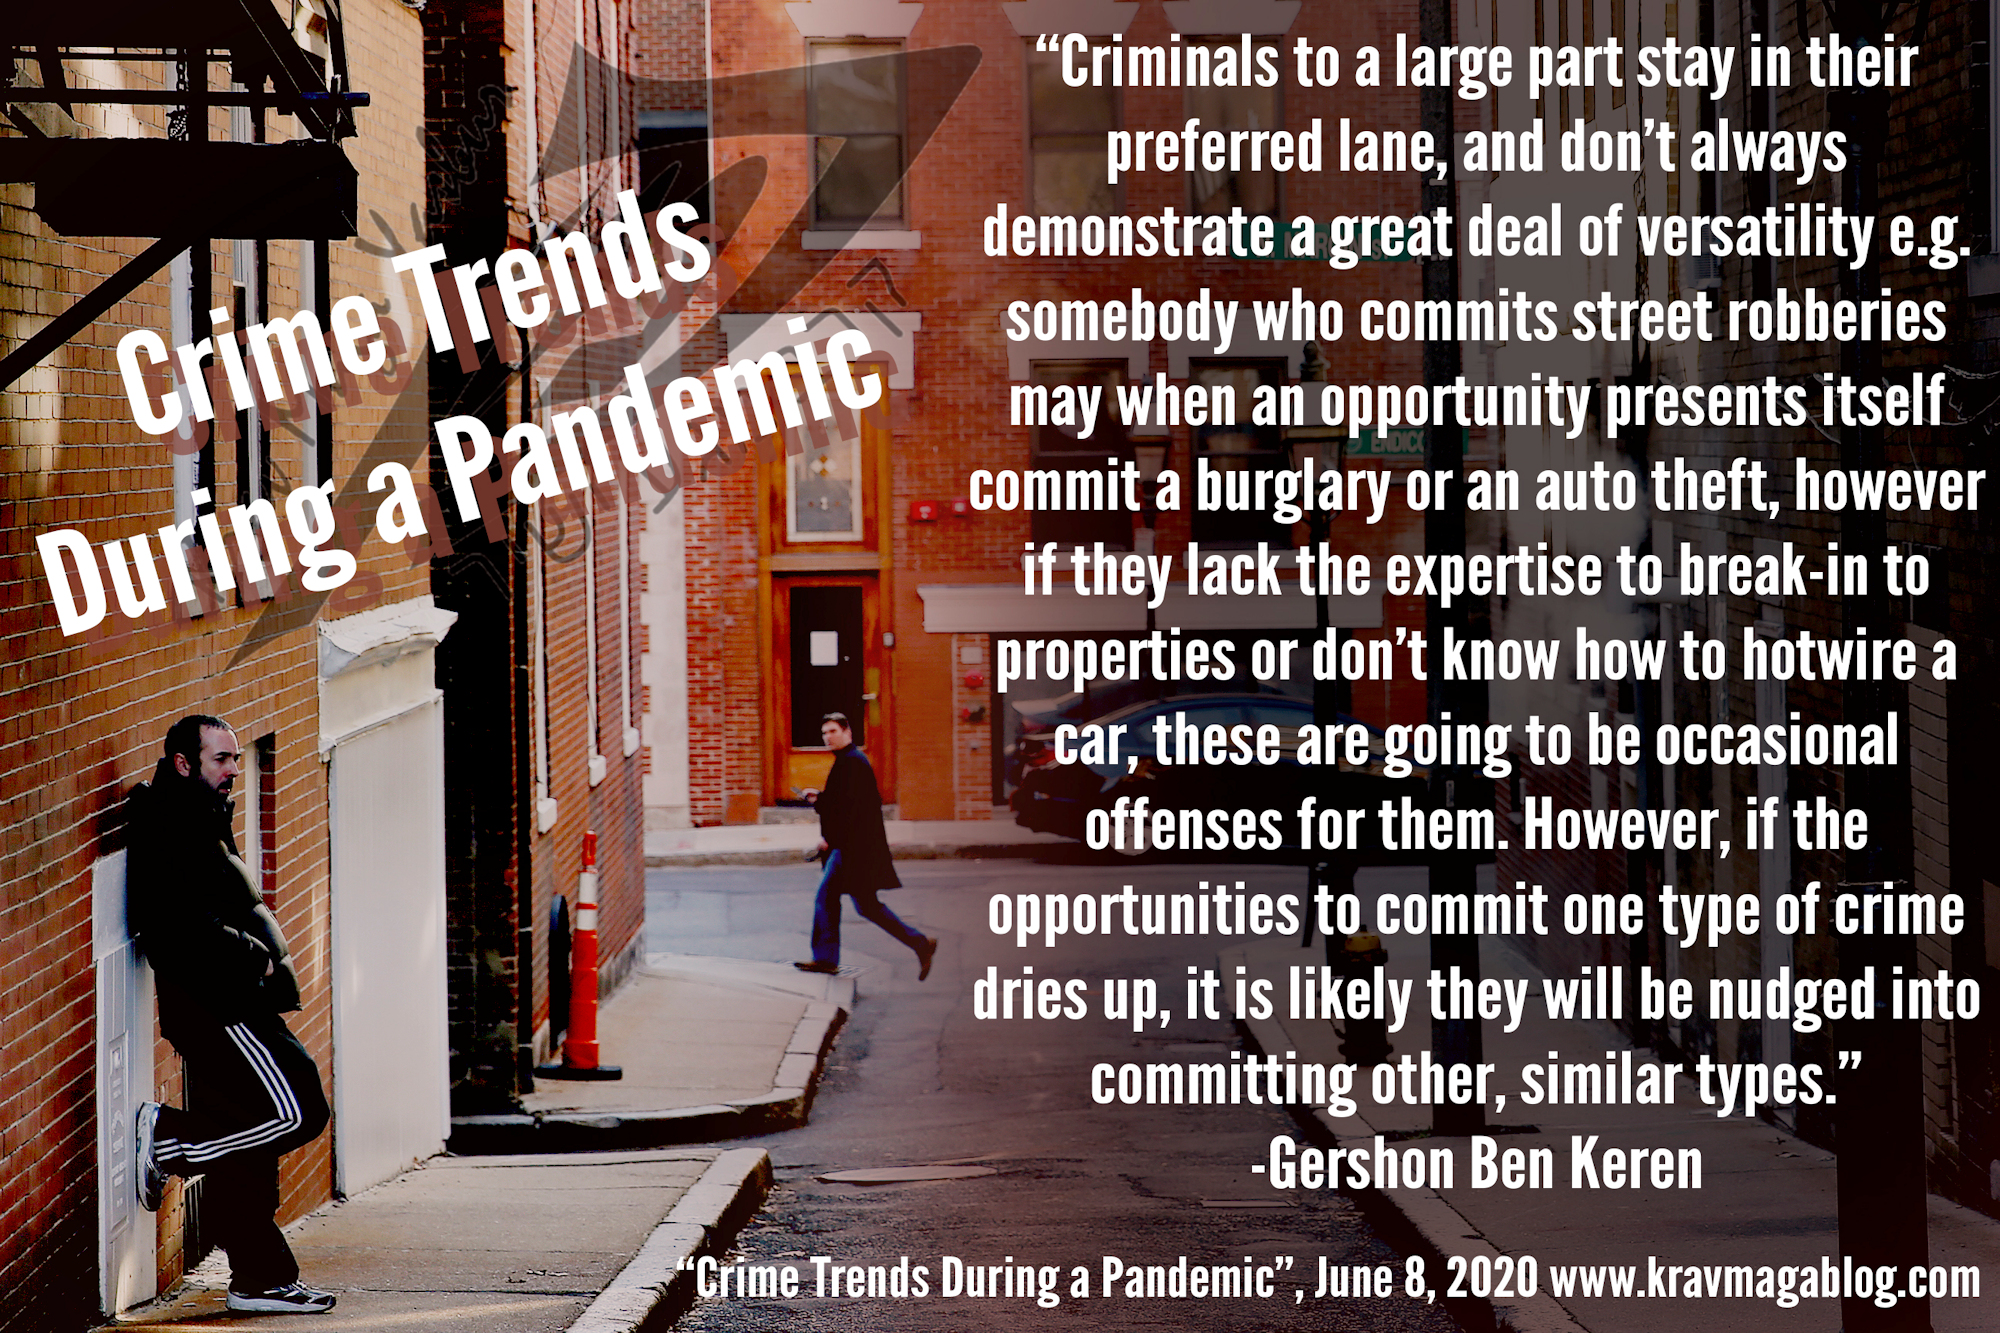 Blog About Crime trends During A Pandemic